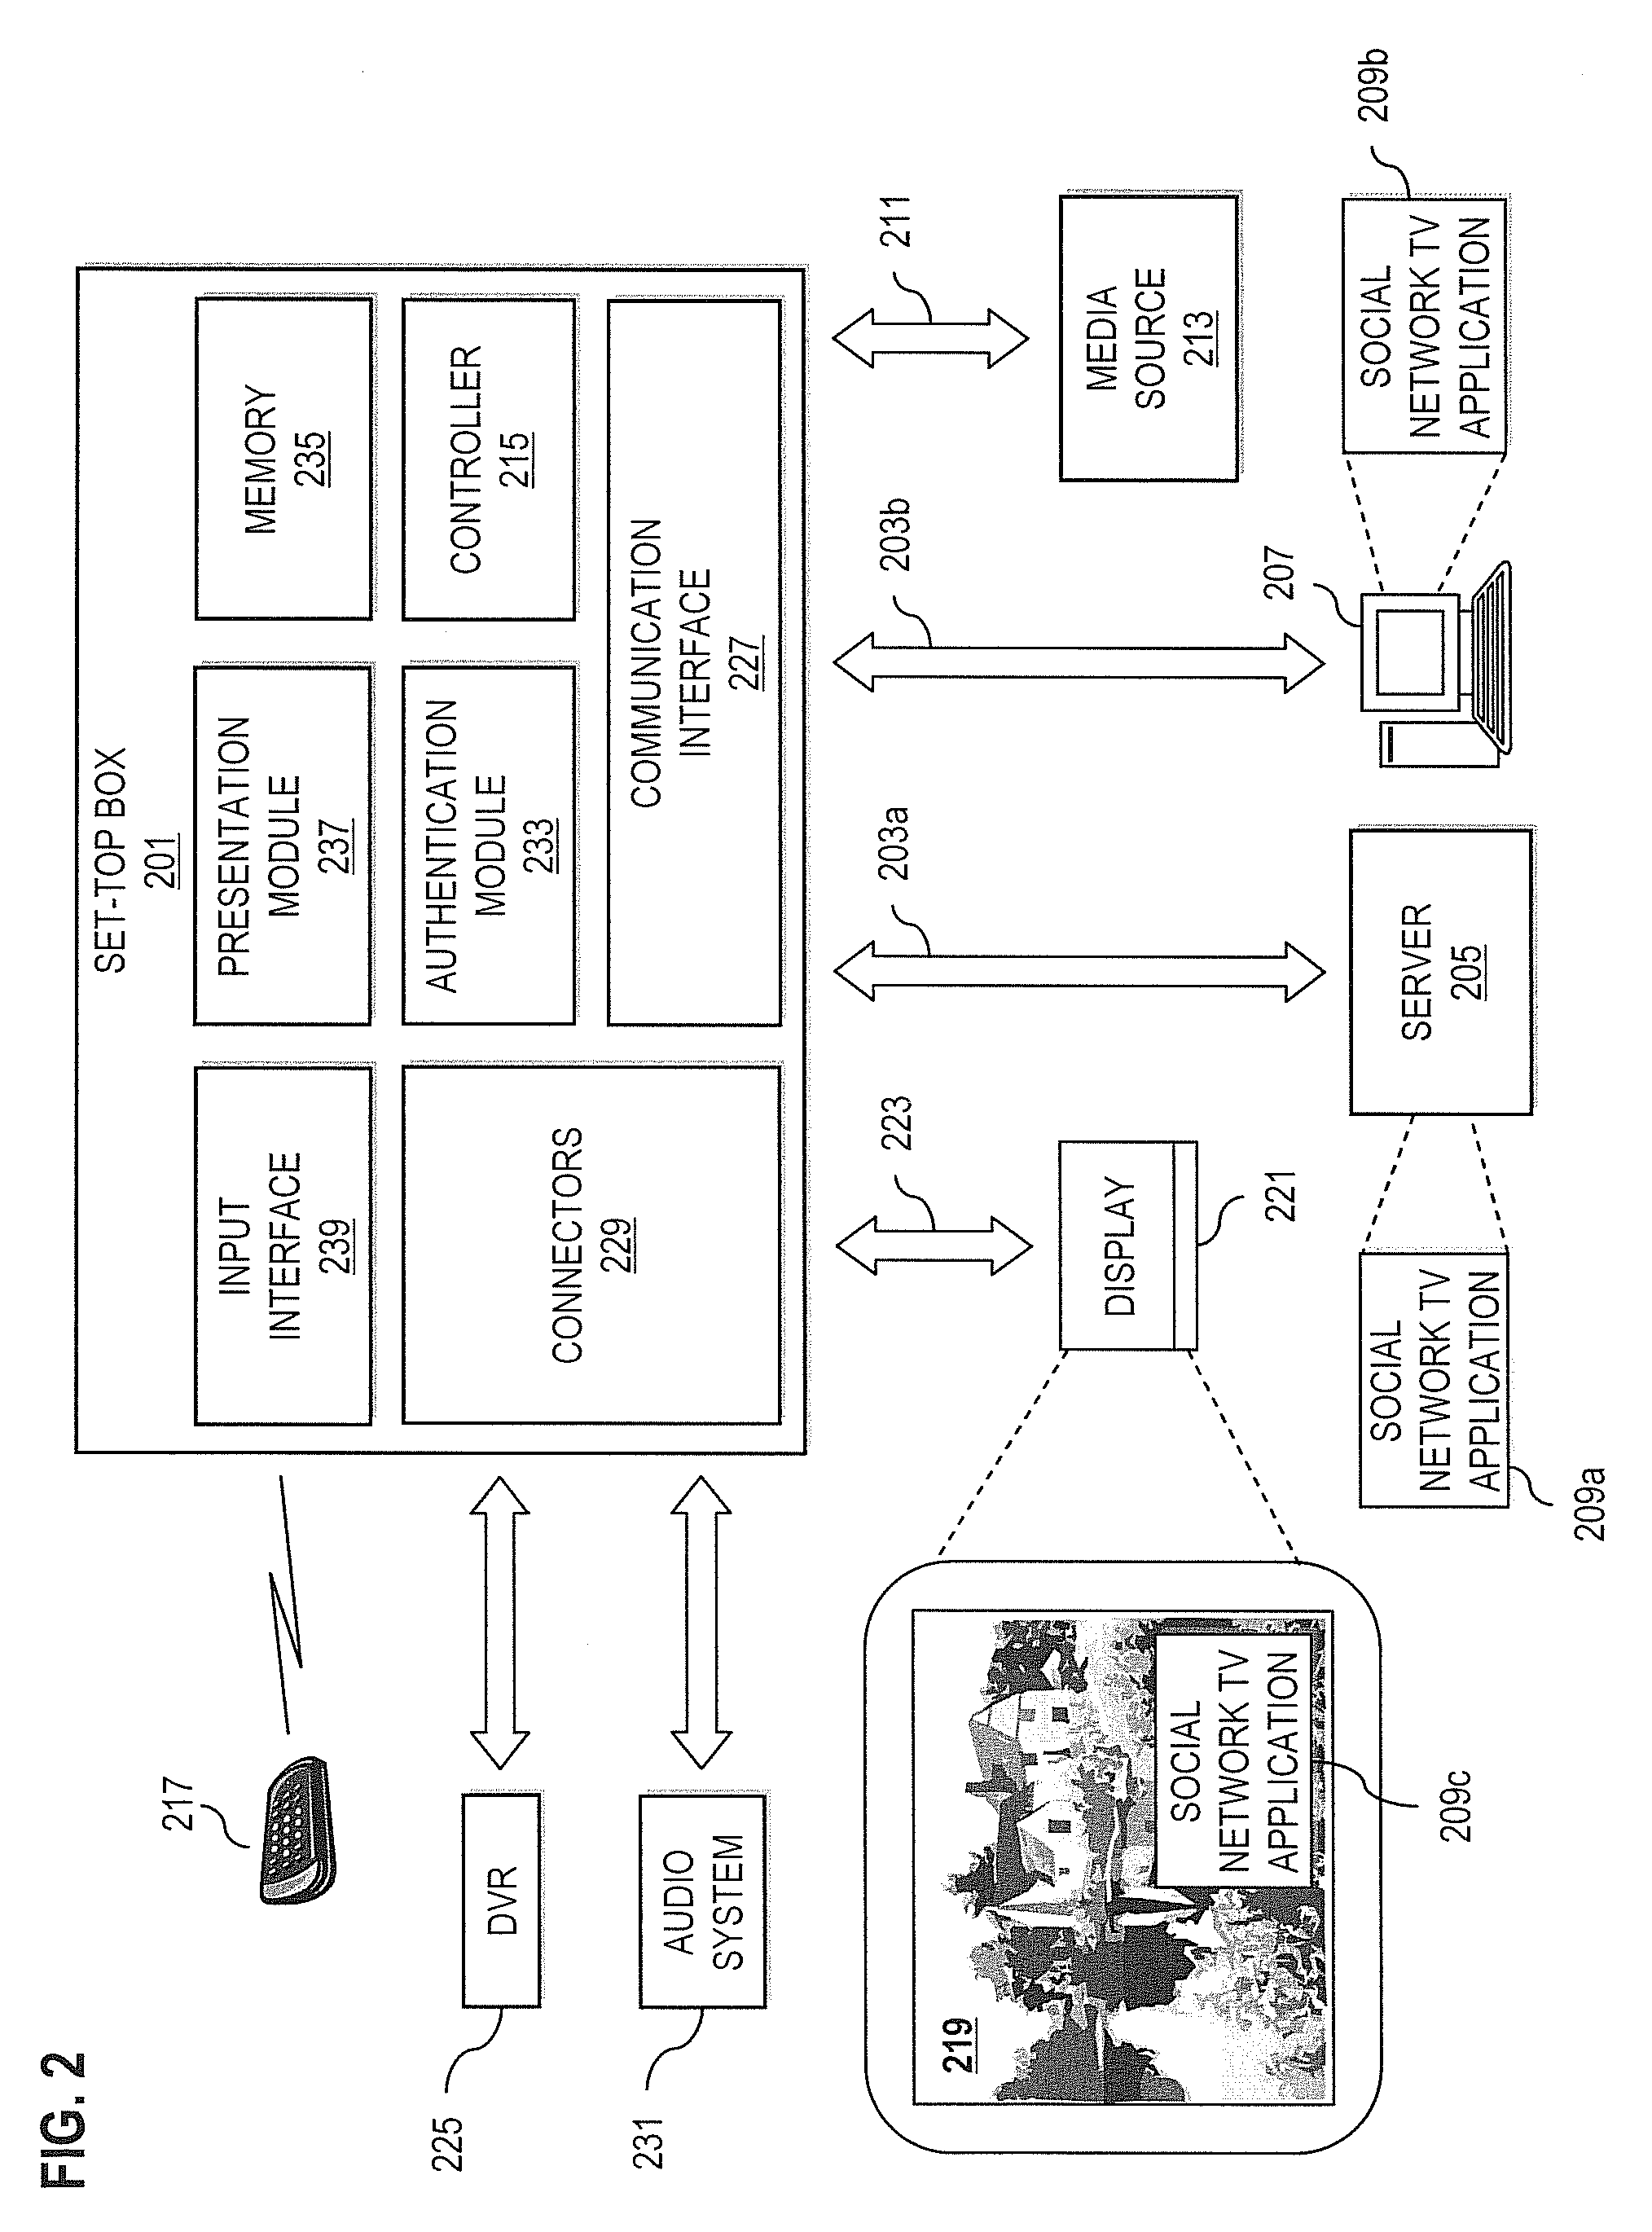 Method and apparatus for providing online social networking for television viewing